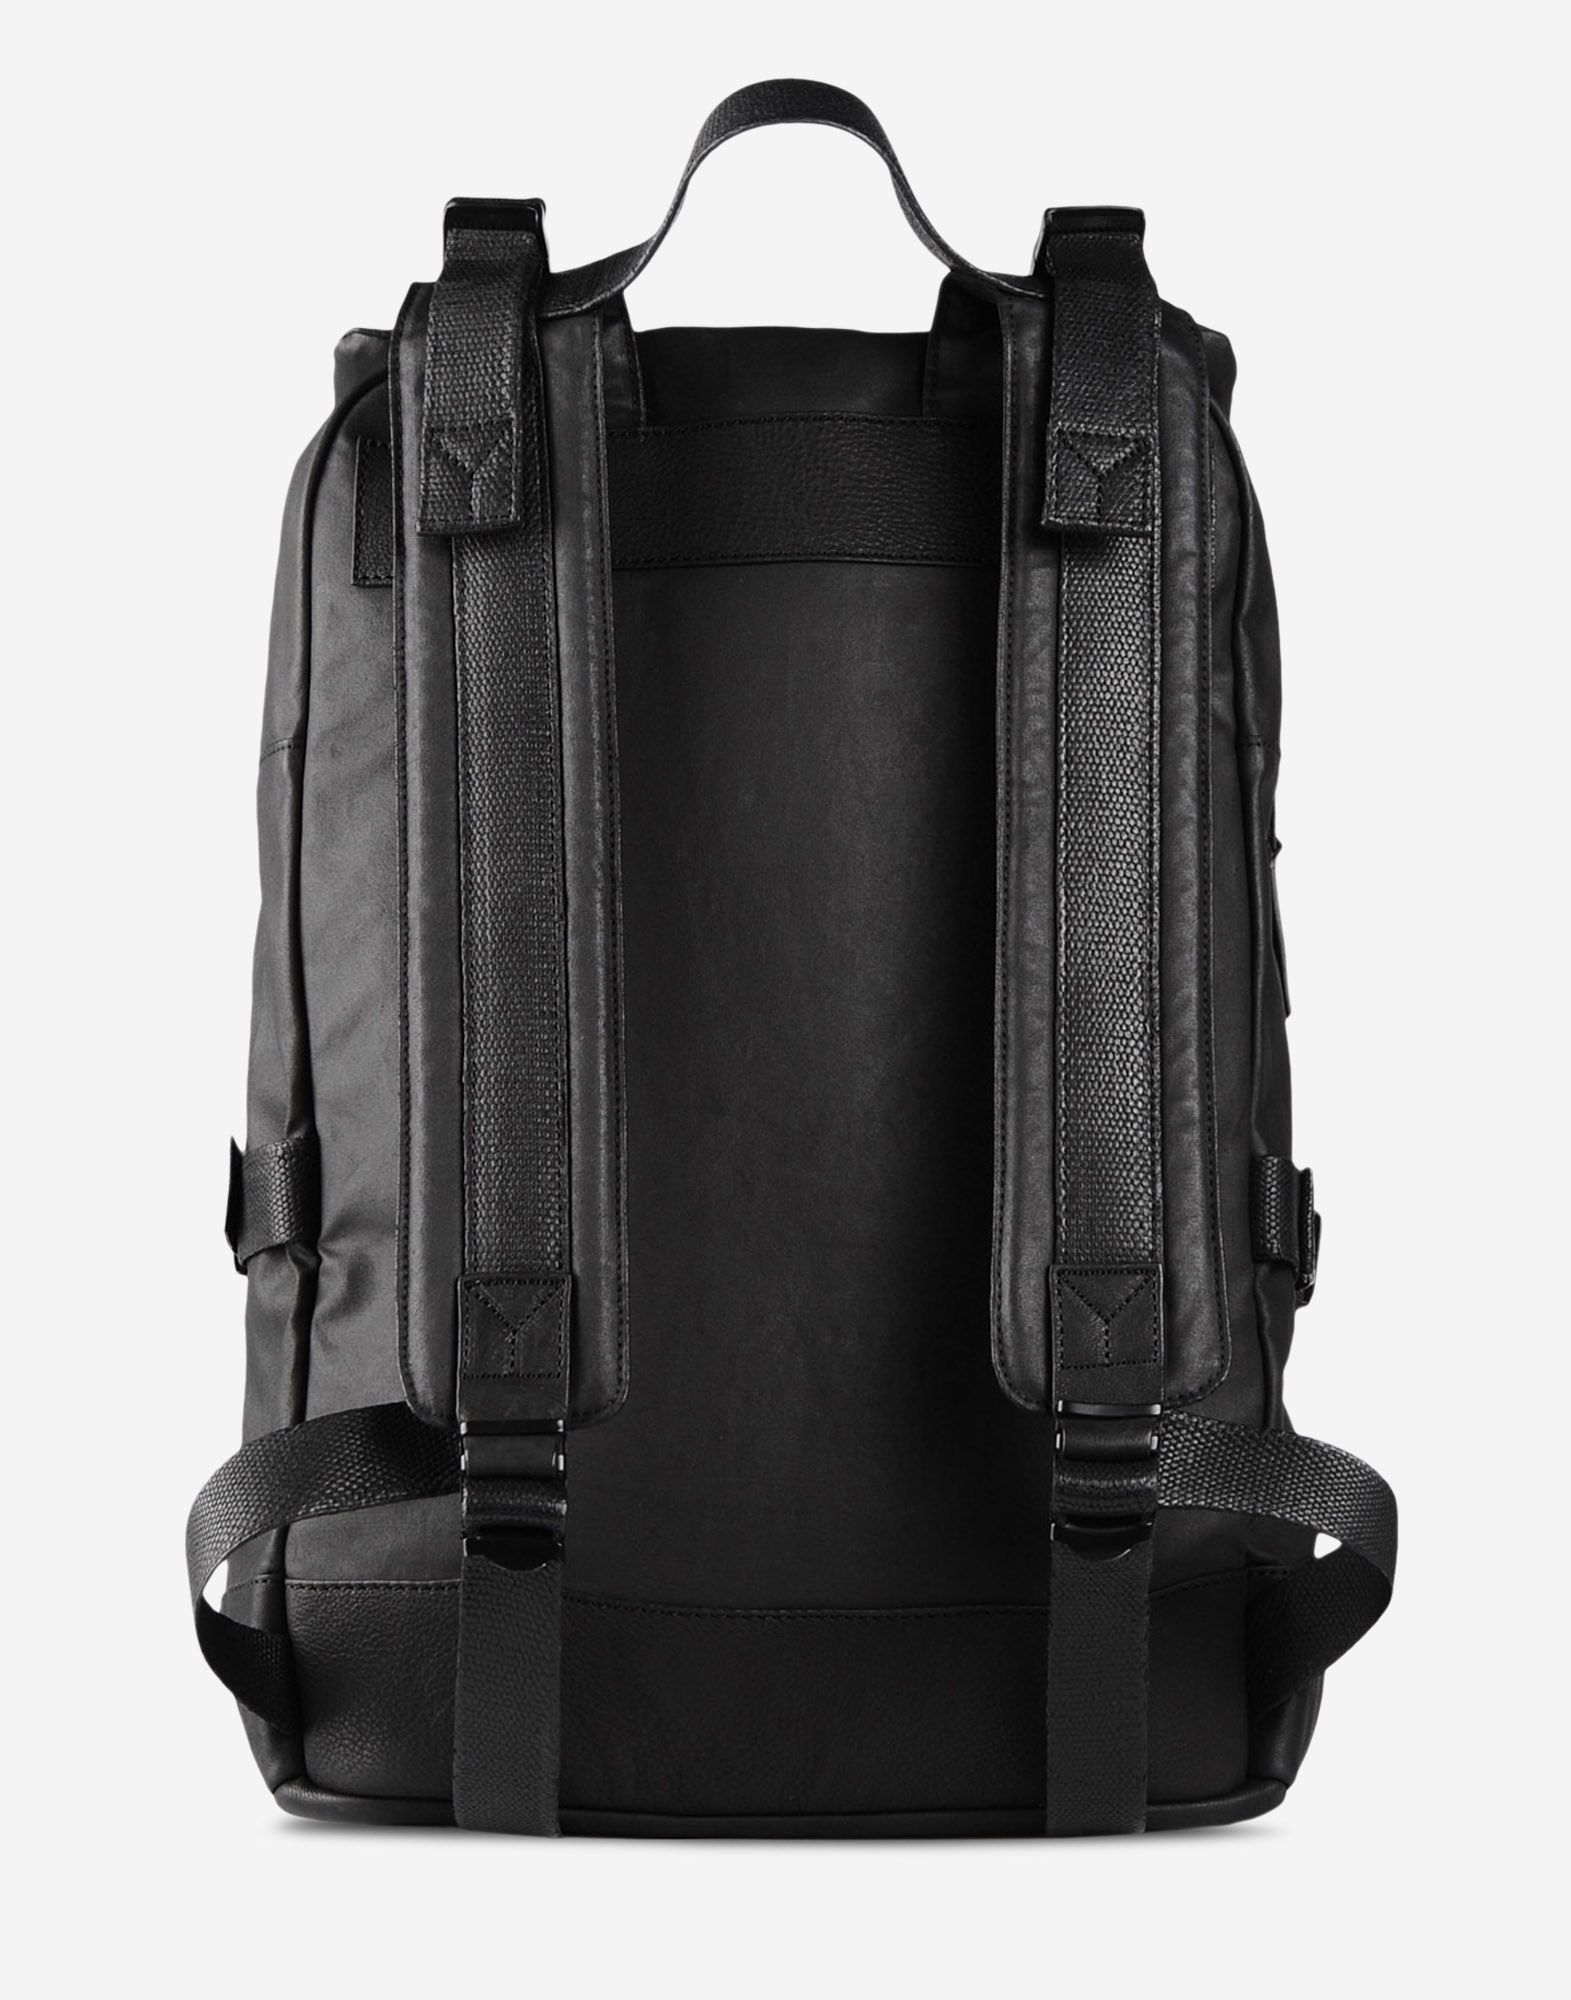 Y 3 TOILE BACKPACK for Women | Adidas Y-3 Official Store